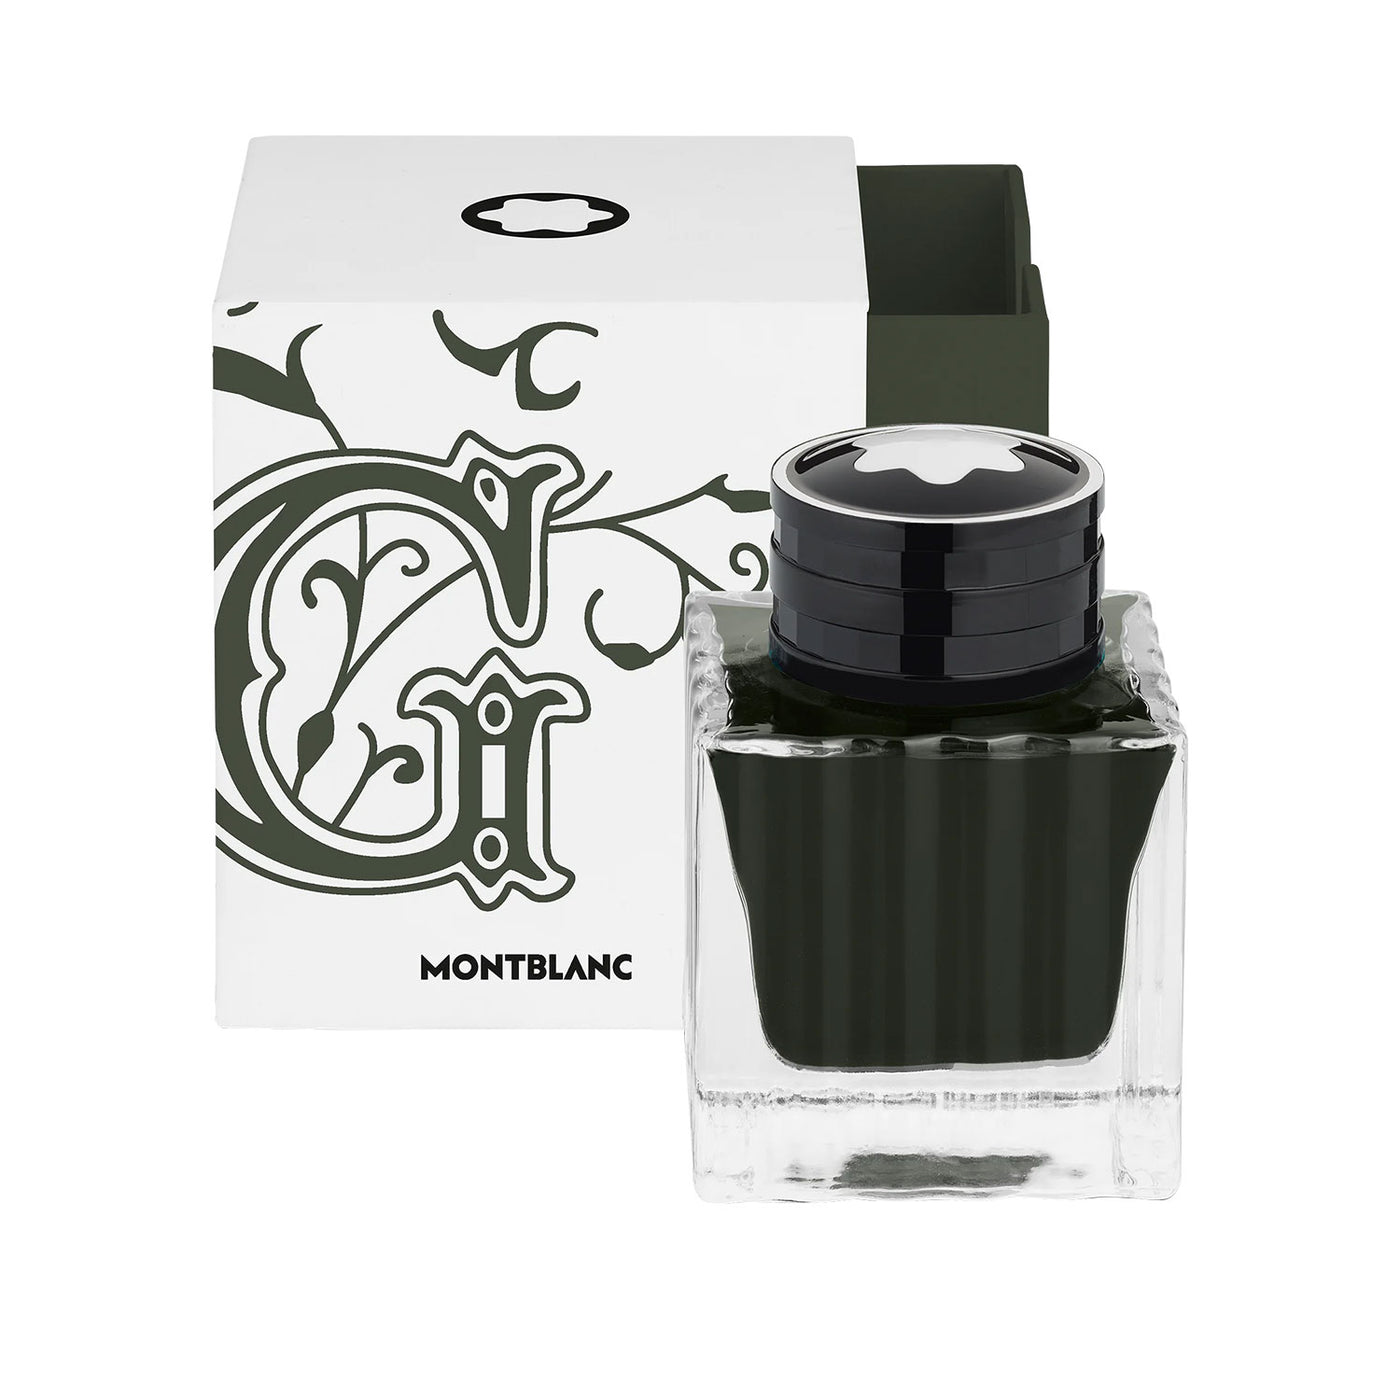 Montblanc Homage to the Brothers Grimm Ink Bottle, Green - 50ml